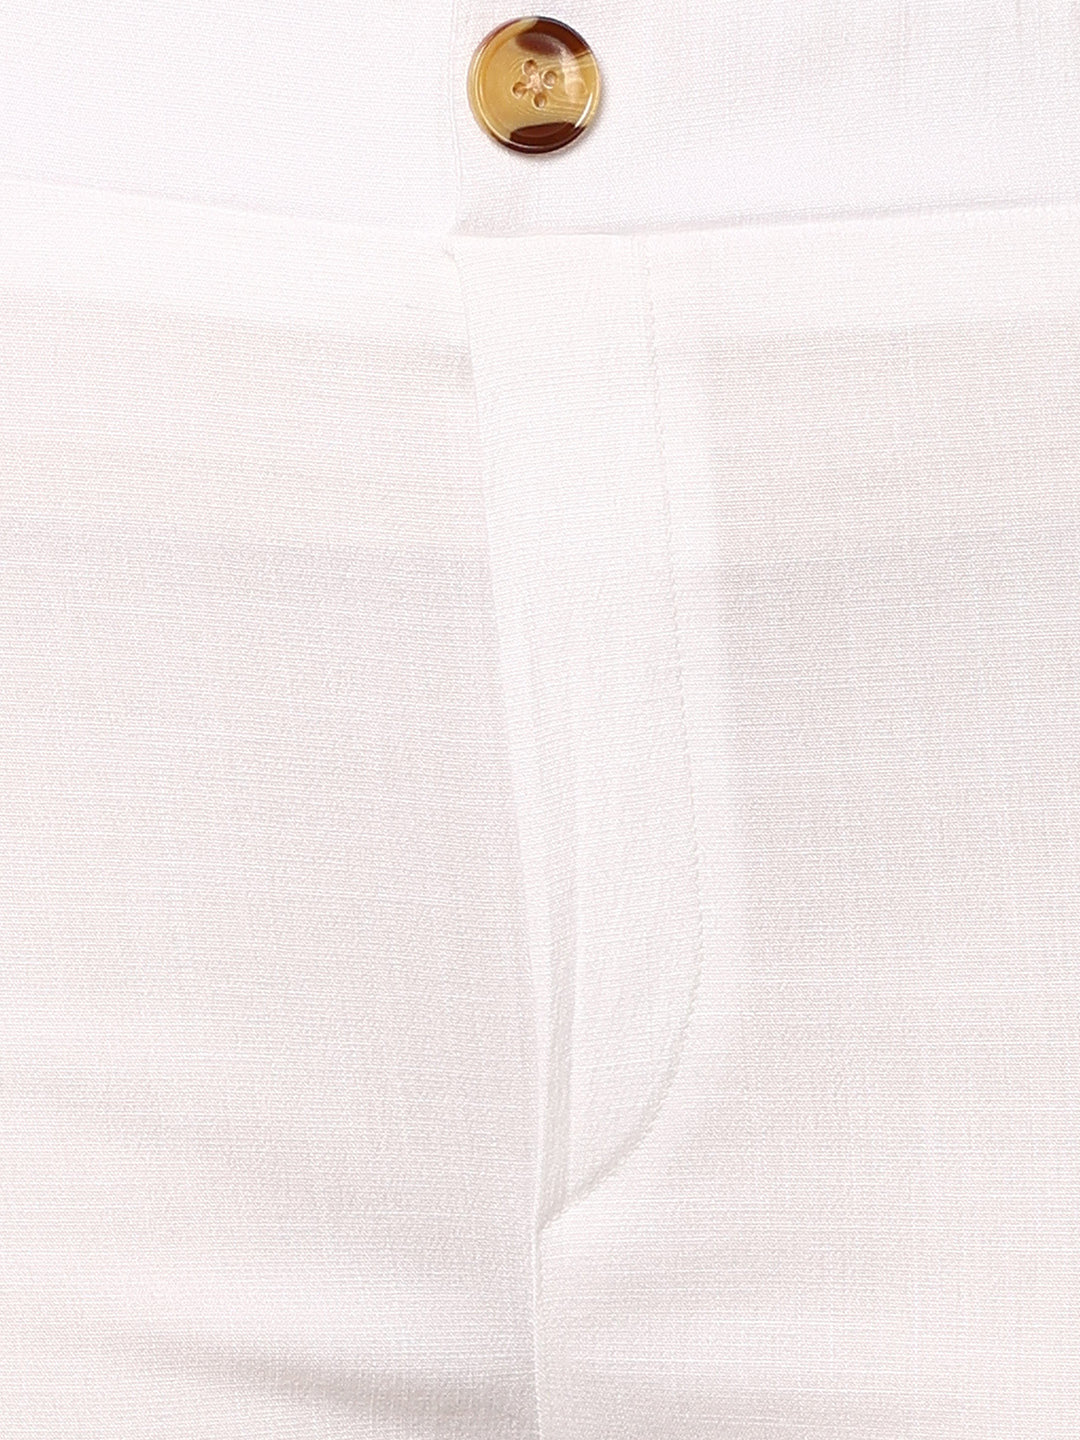 White Lycra Blend Solid Bootcut Trousers